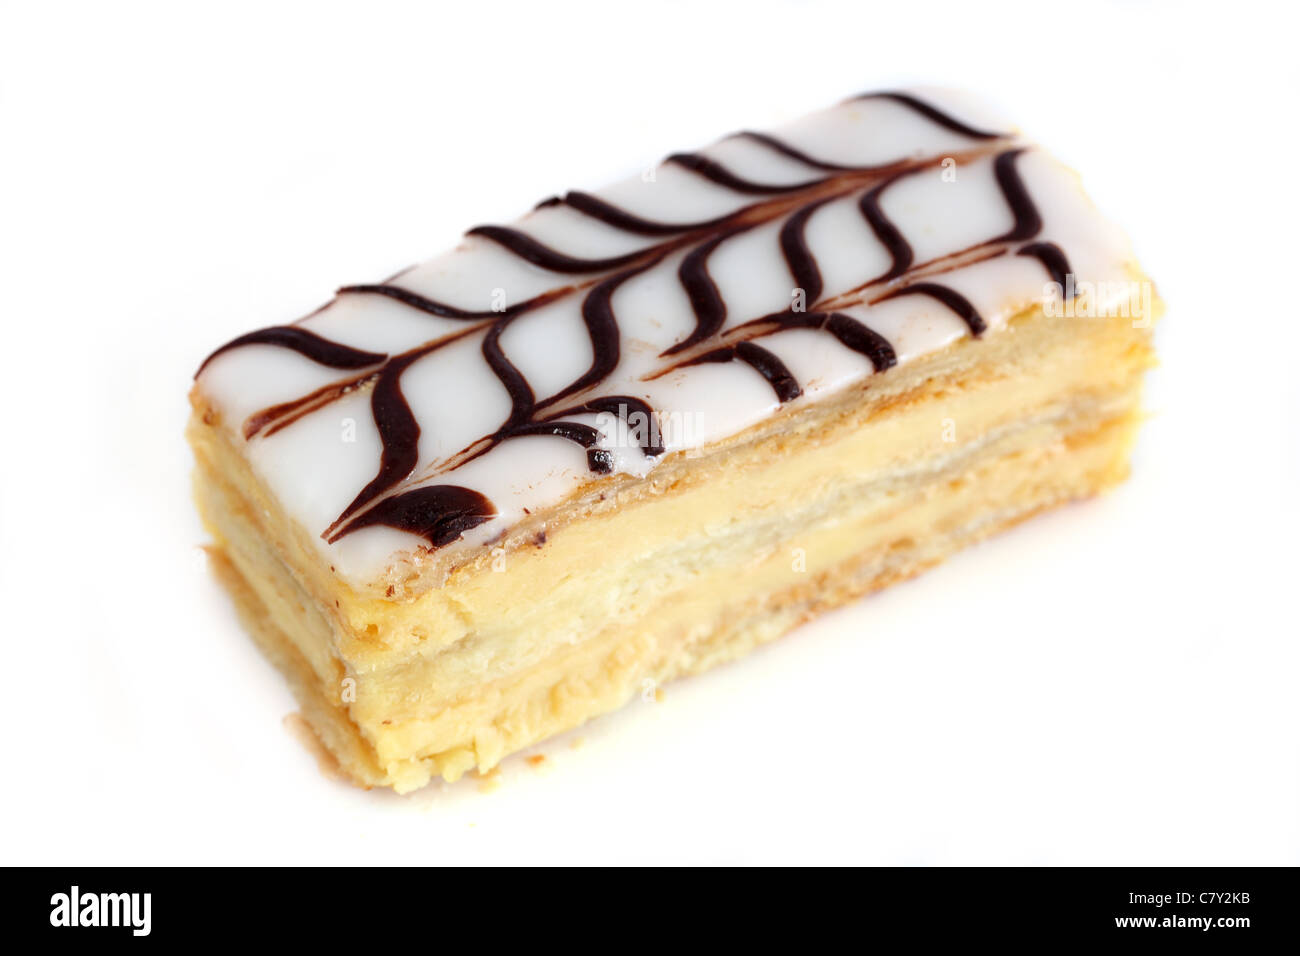 Mille-feuille Chocolate layer cake Stock Photo